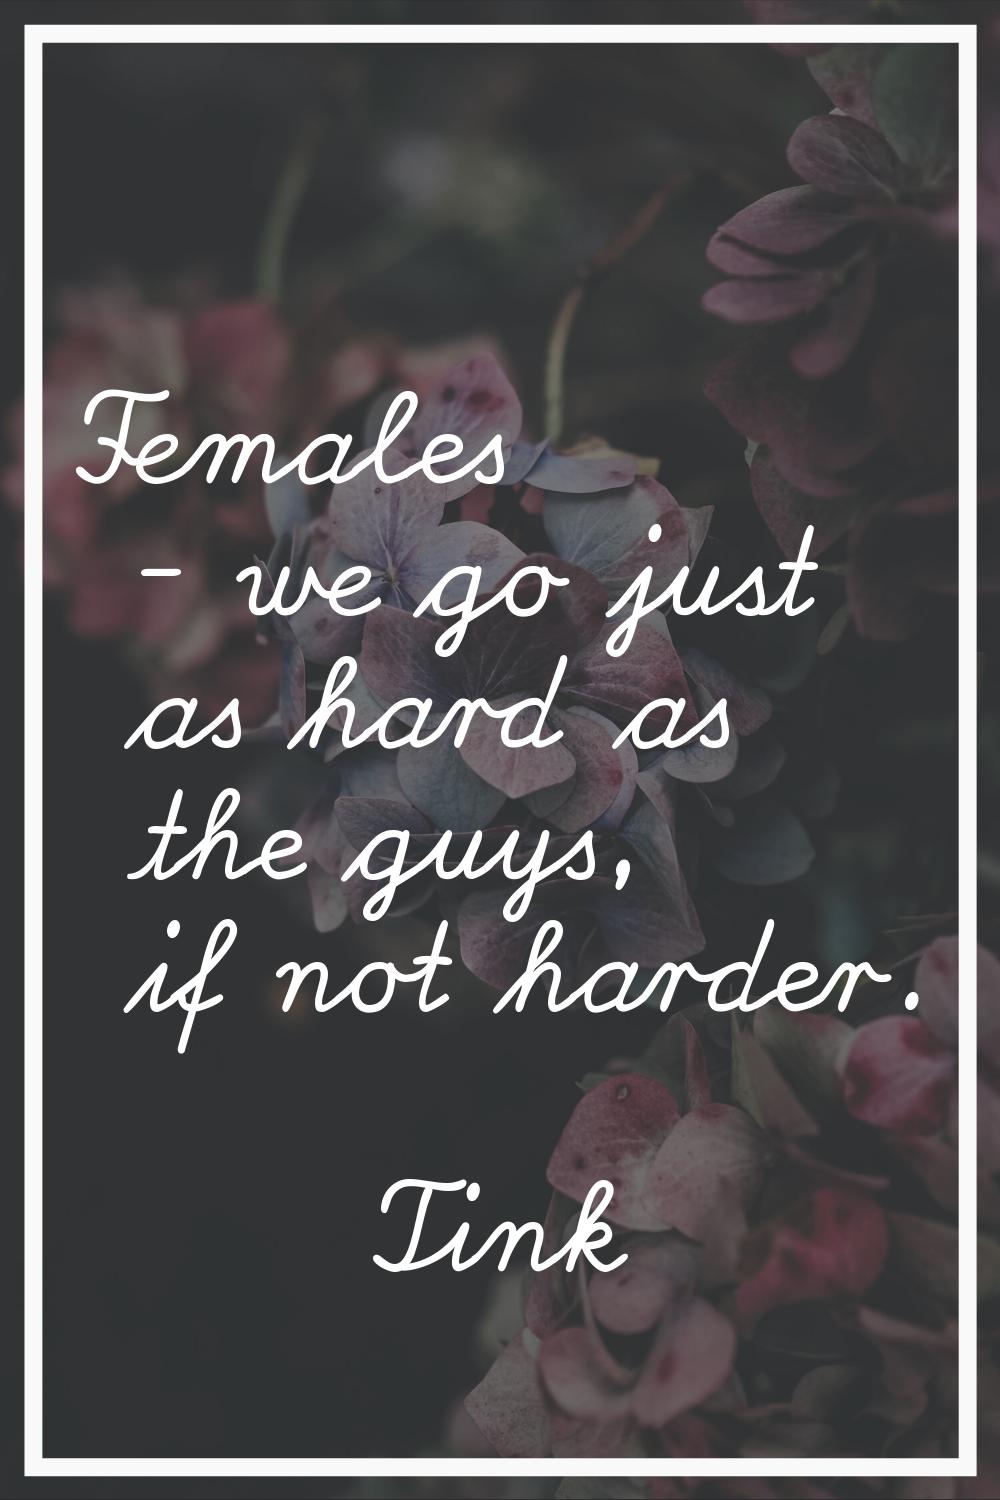 Females - we go just as hard as the guys, if not harder.